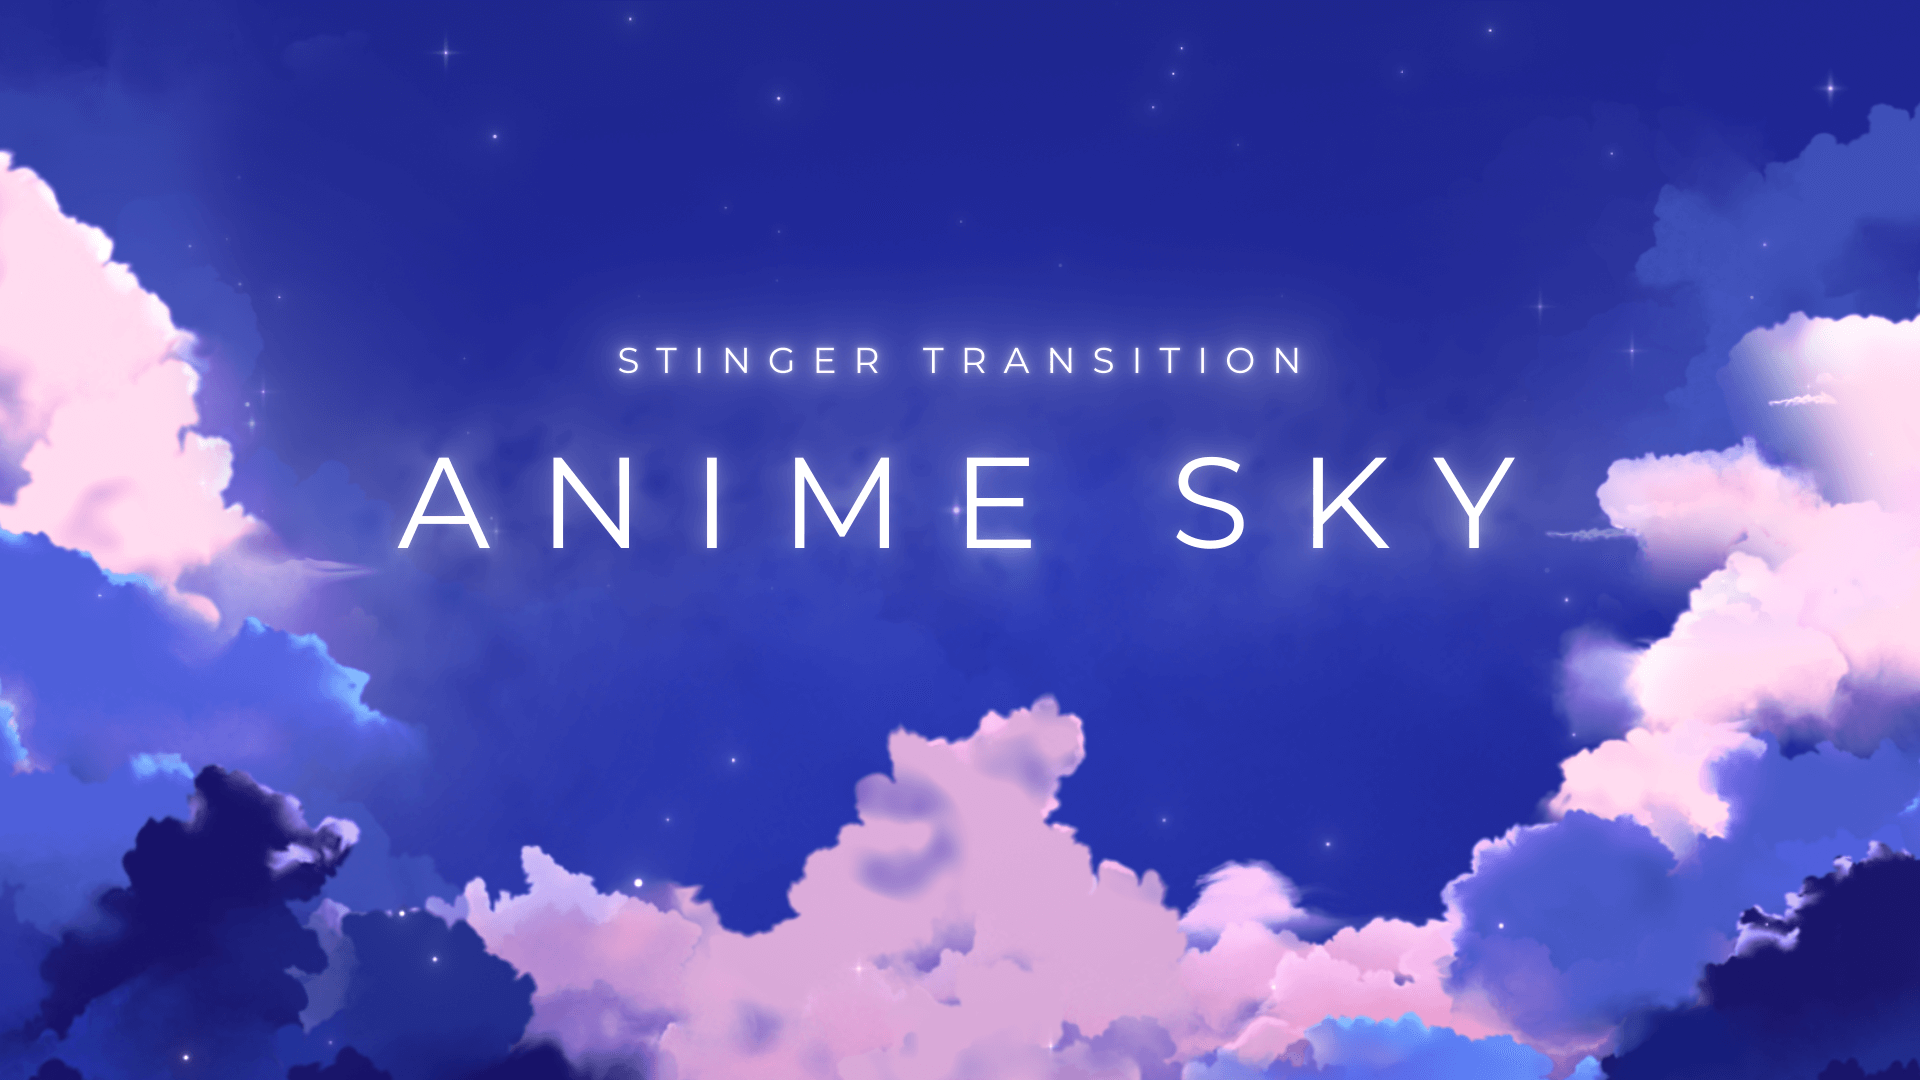 Anime Sky - Stinger Transition for Twitch, Youtube and Facebook